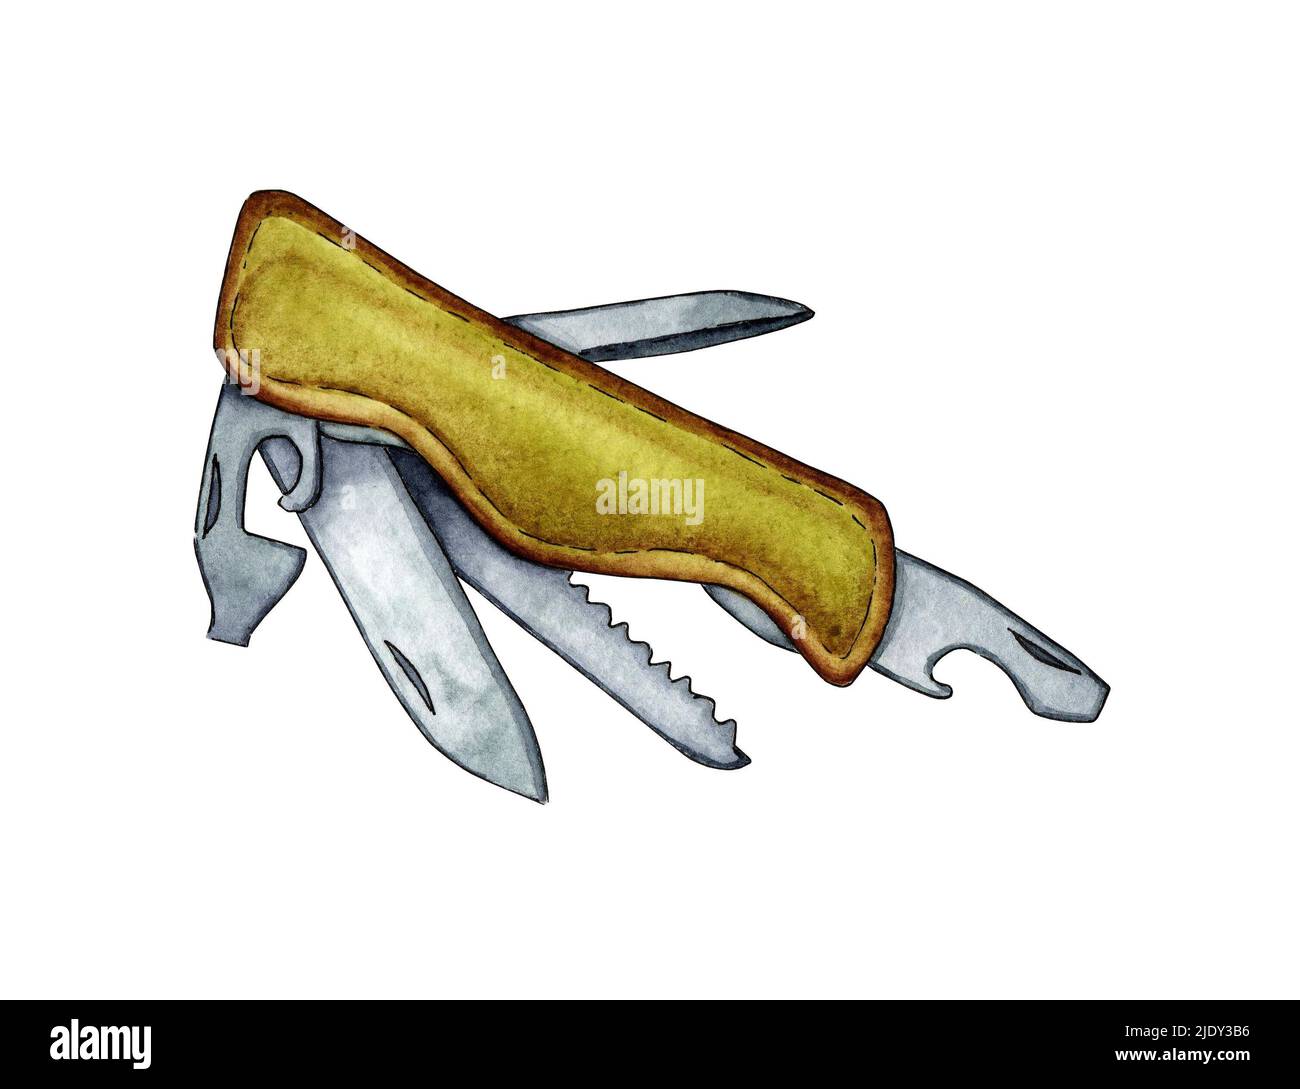 Watercolor illustration of a multifunctional folding camping knife. Swiss Army Knife, Multi-Purpose Penknife, Army Knife. For the design of design com Stock Photo